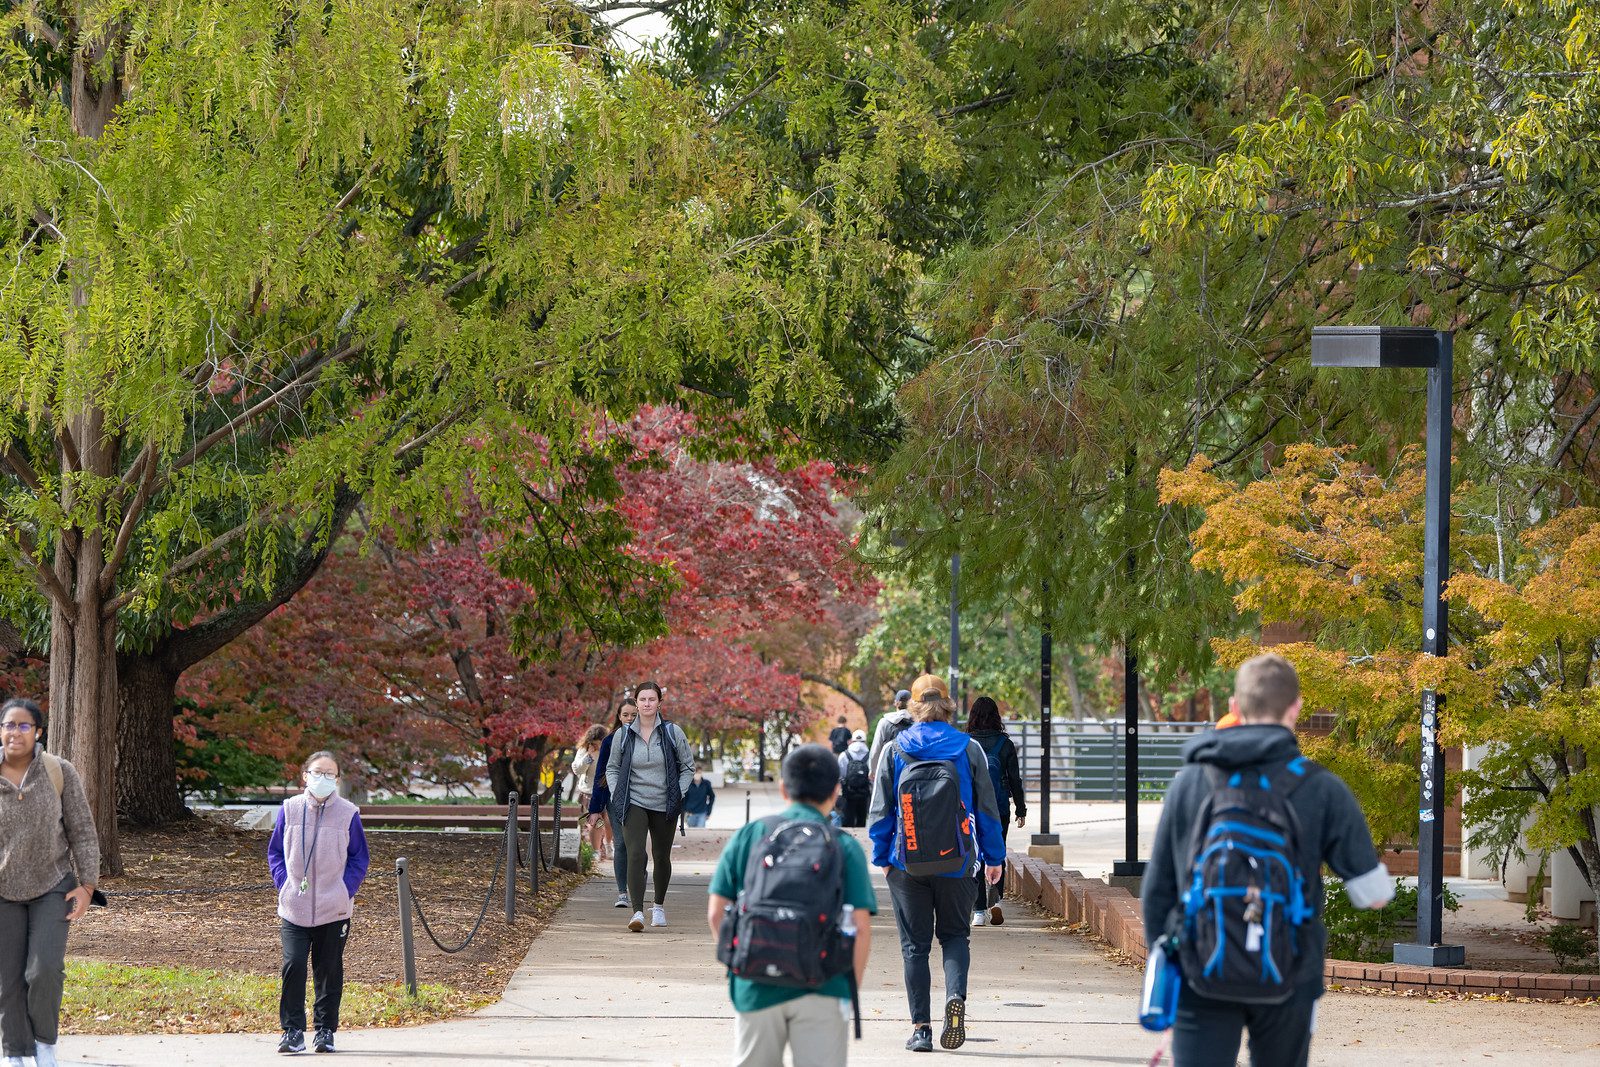 Clemson students walking on campus with leaves starting to change colors, signaling fall. Students on the president's list are happy the semester is coming to a close.